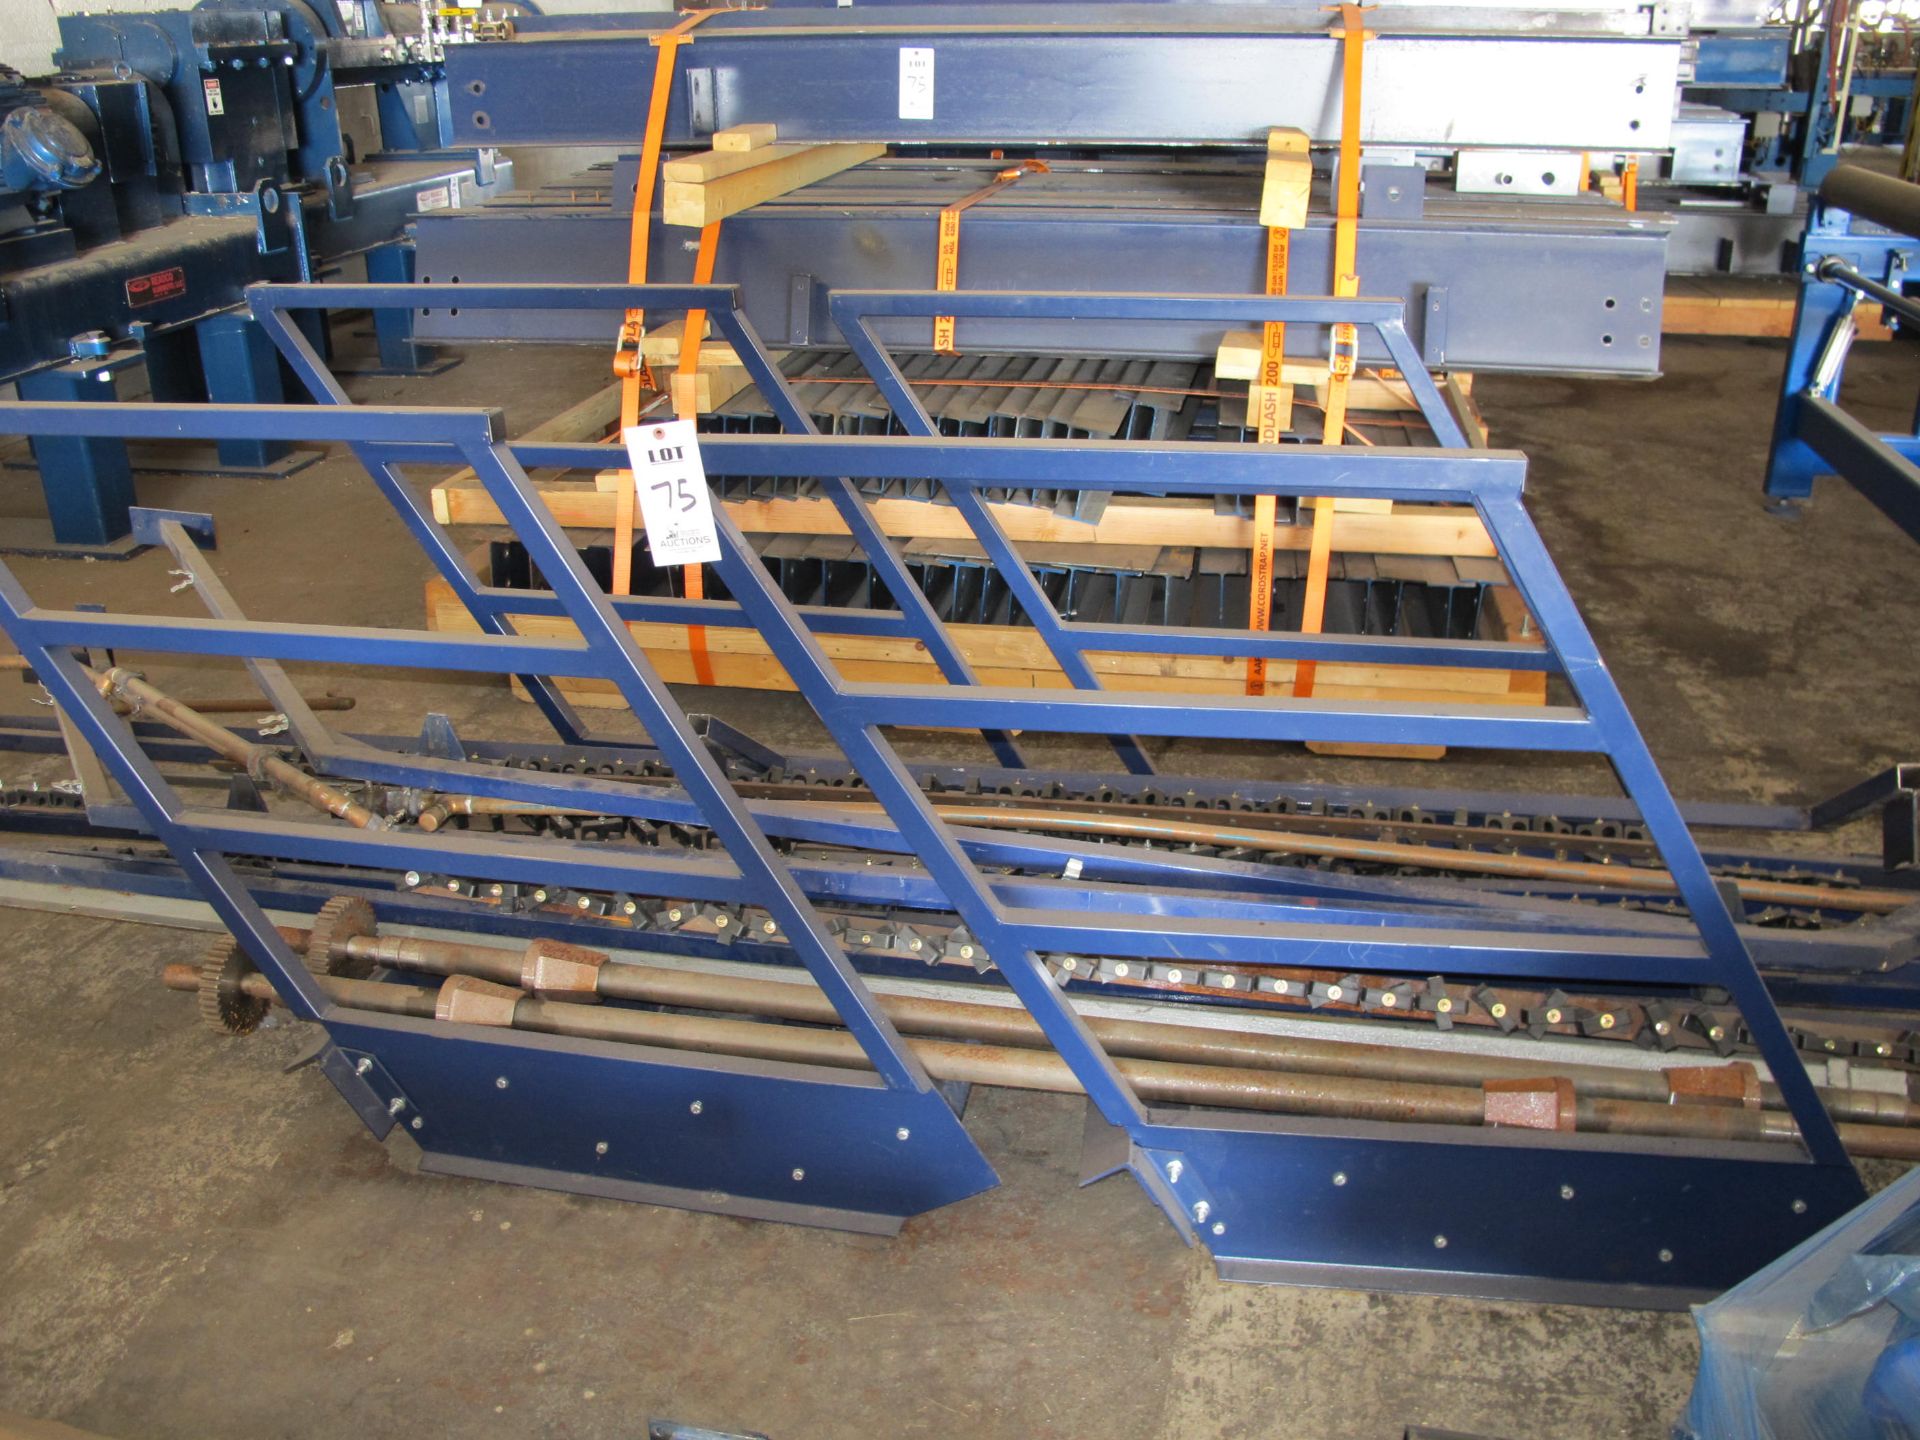 MEZZANINE STRUCTURE, STEEL DECK, ROUGHLY 40' X 40', STAIRS, HAND RAILS, PLATFORMS, ETC., LOADING & - Image 6 of 20